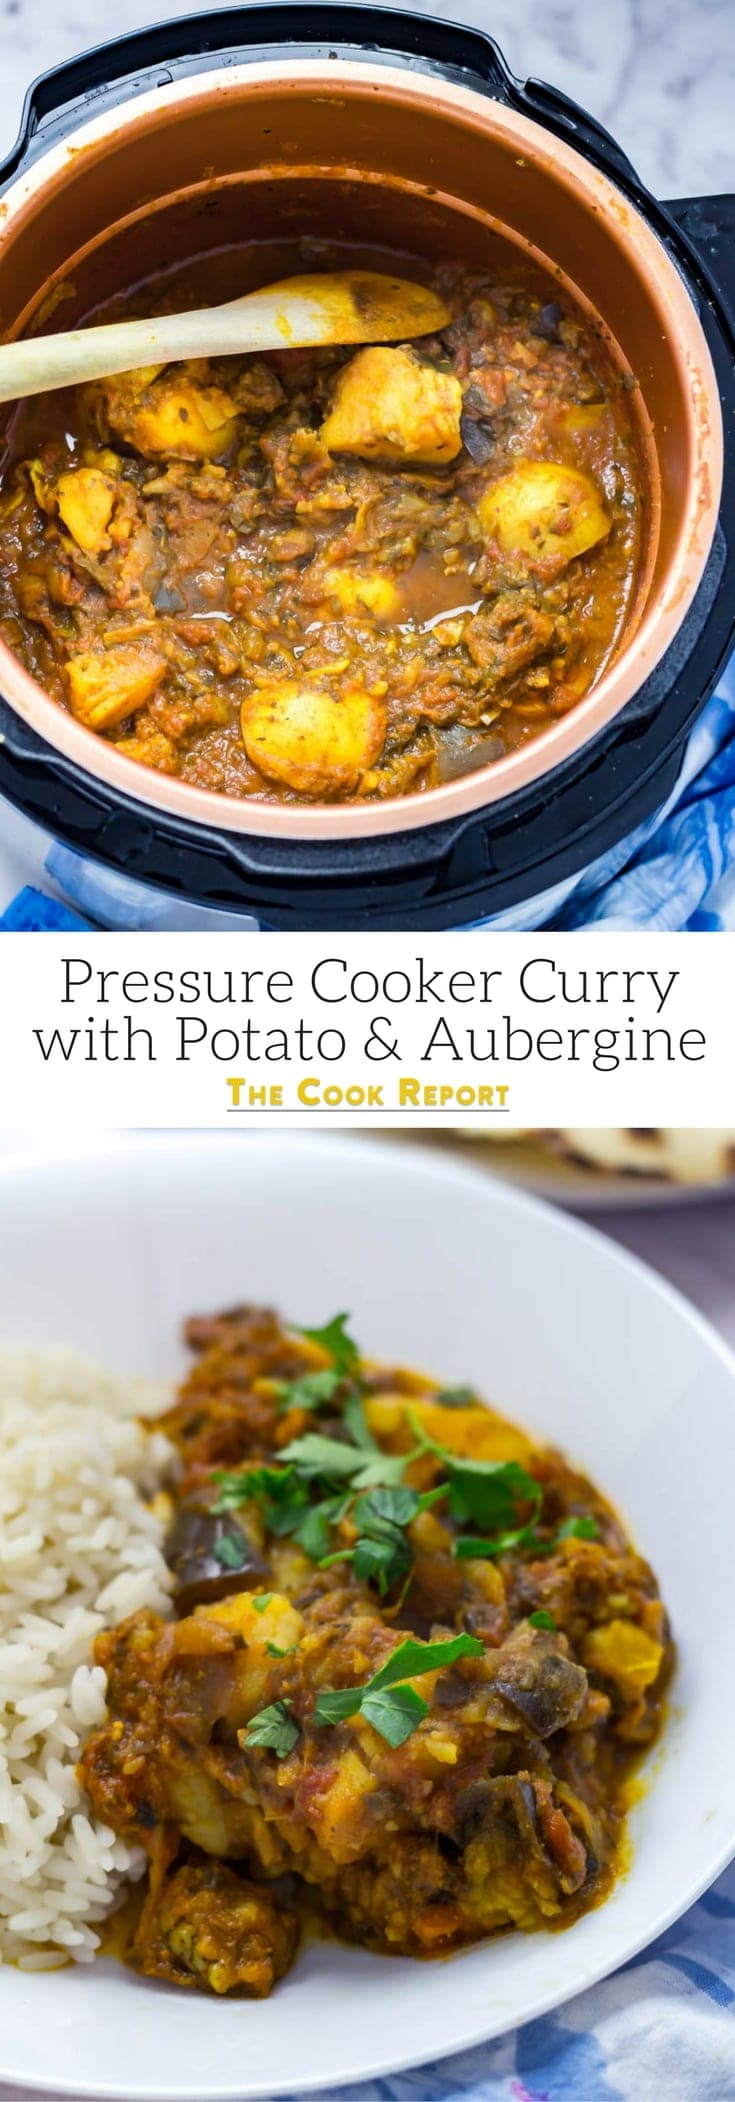 Pressure Cooker Curry with Potato & Aubergine • The Cook Report